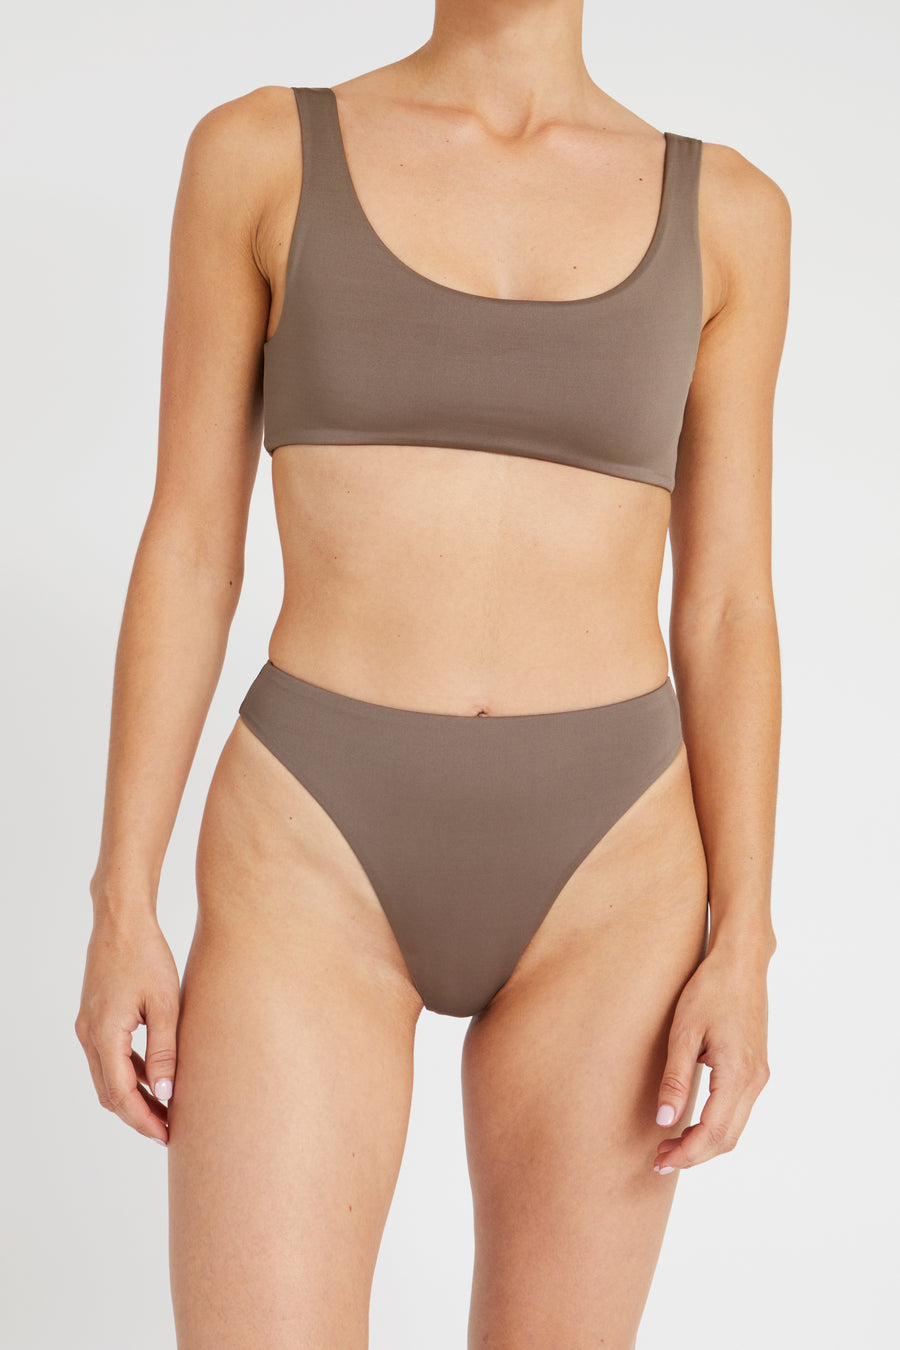 TOP – sporty, brown